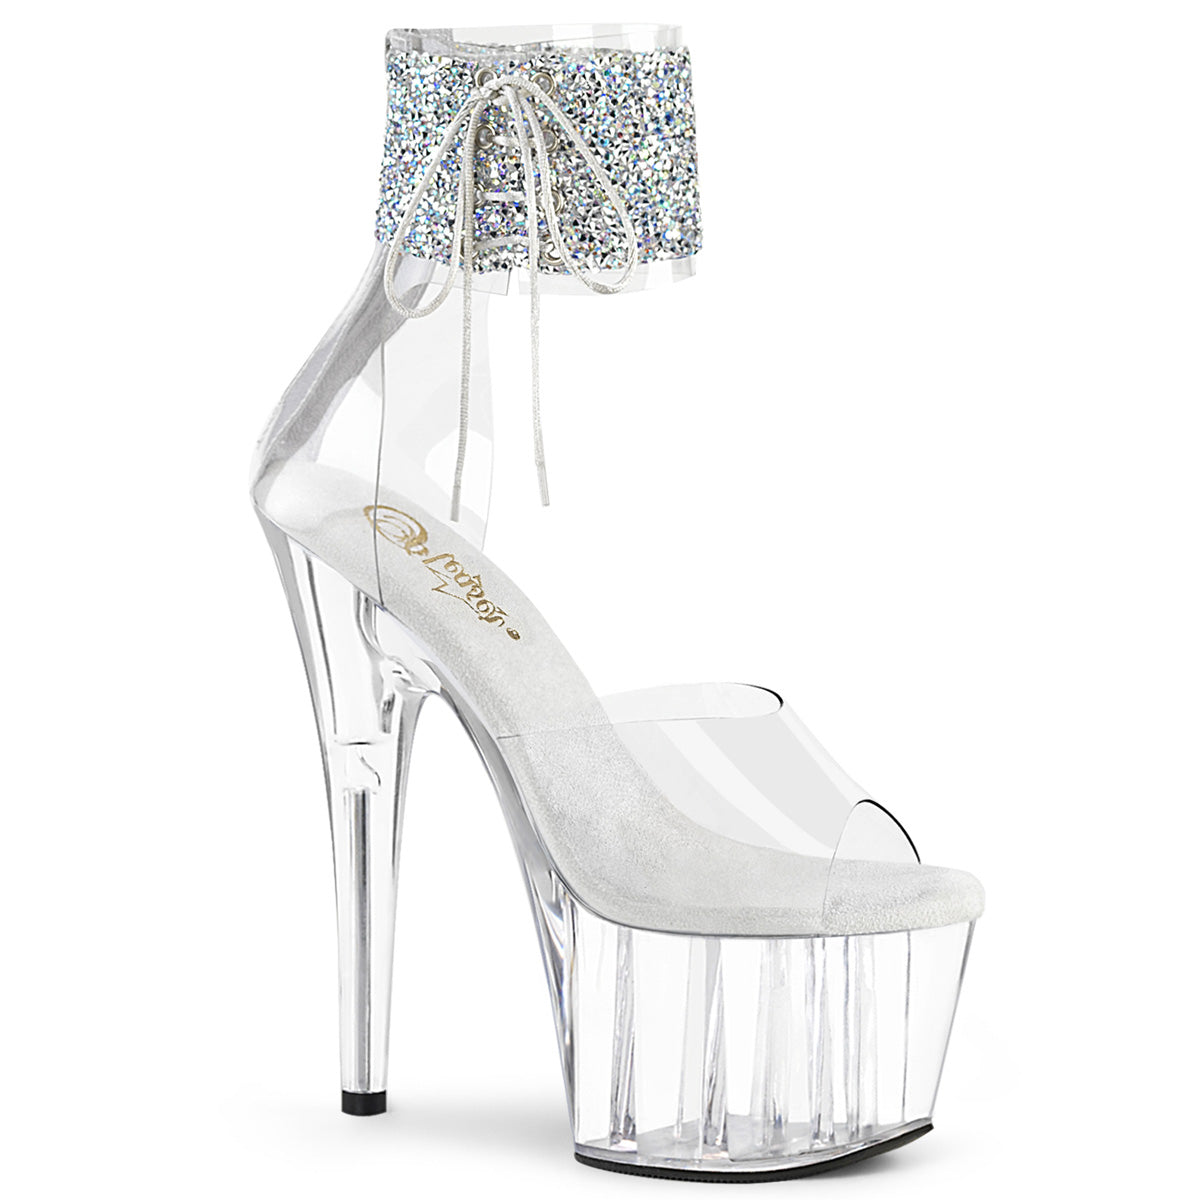 ADORE-724RS-02 Pleasers Clear Platform Exotic Dancing Bling Ankle Cuff Heels